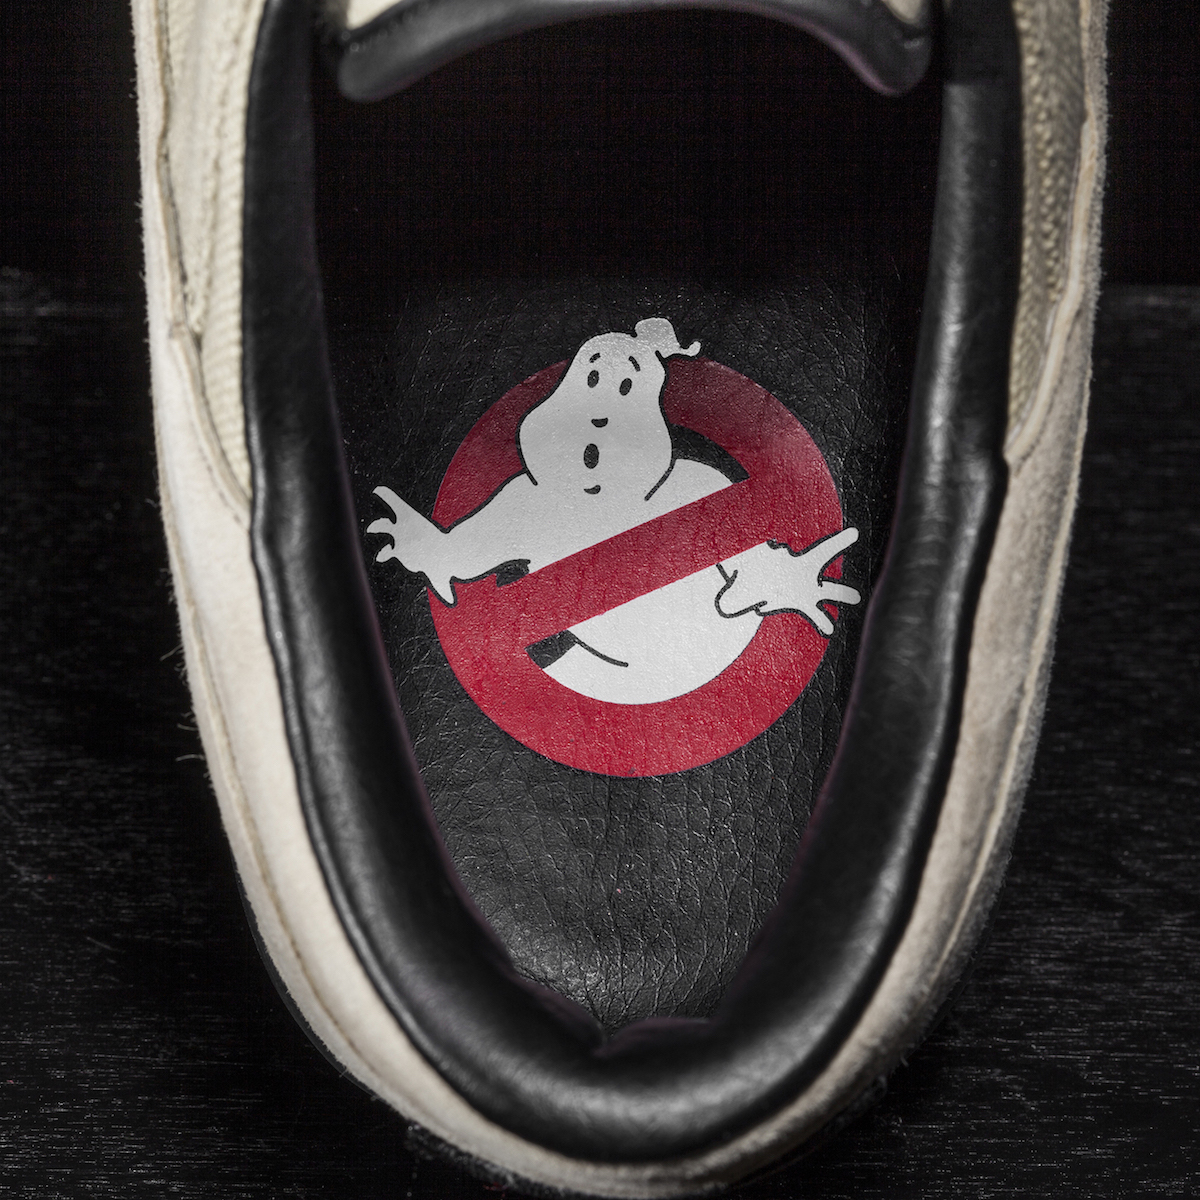 nas x ghostbusters 13